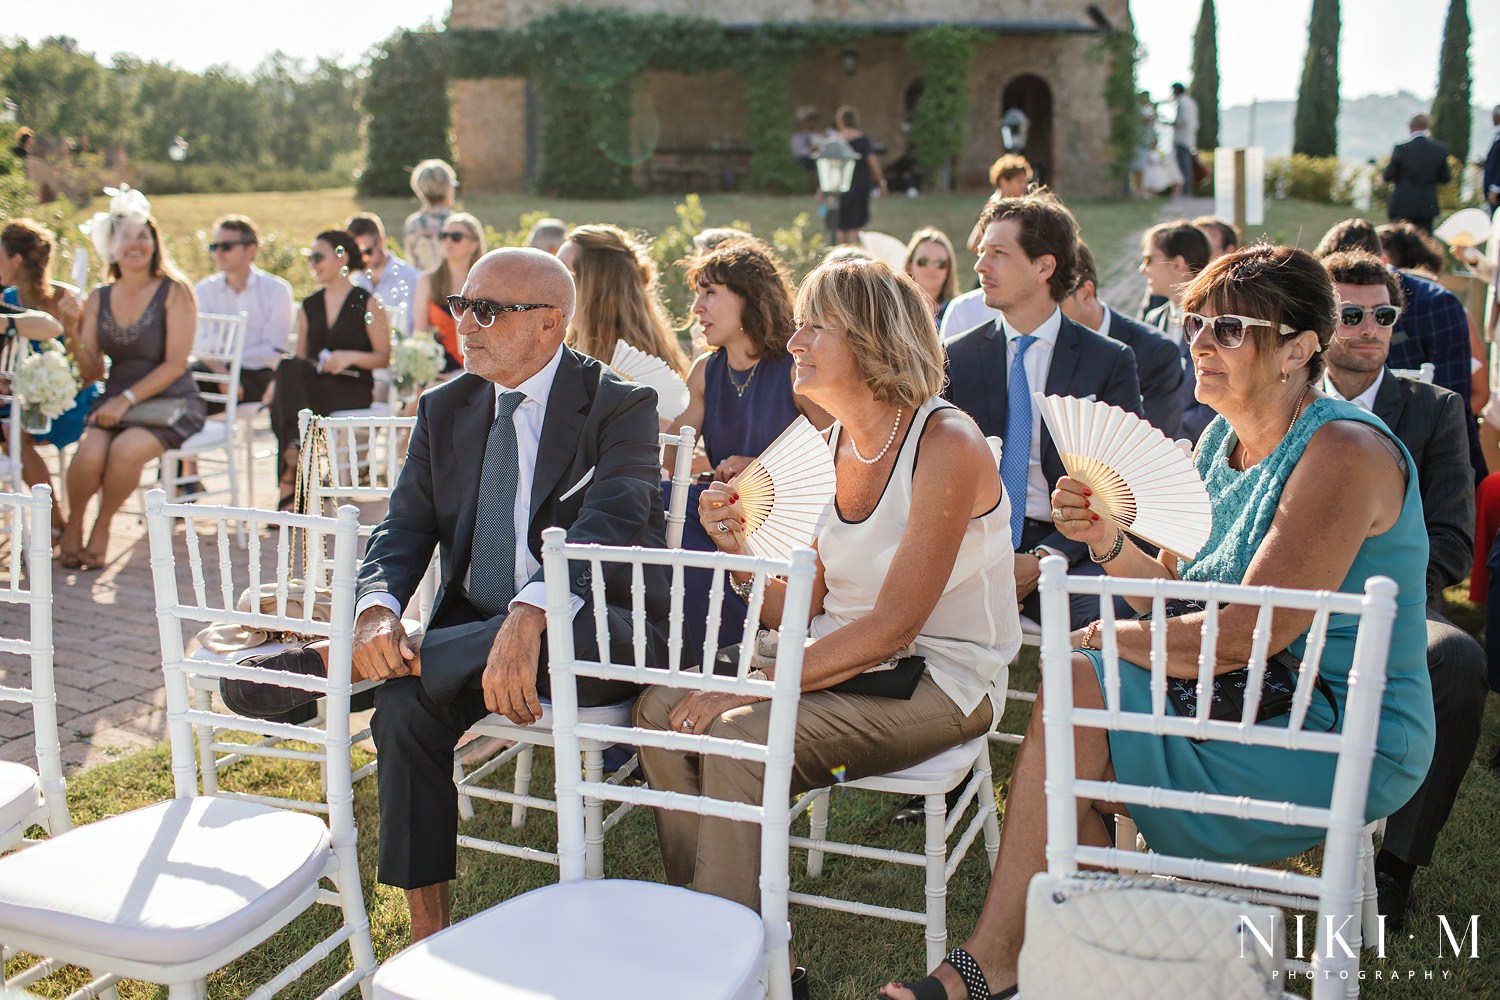 The ceremony at a Tuscany wedding just outside Casale Marittimo